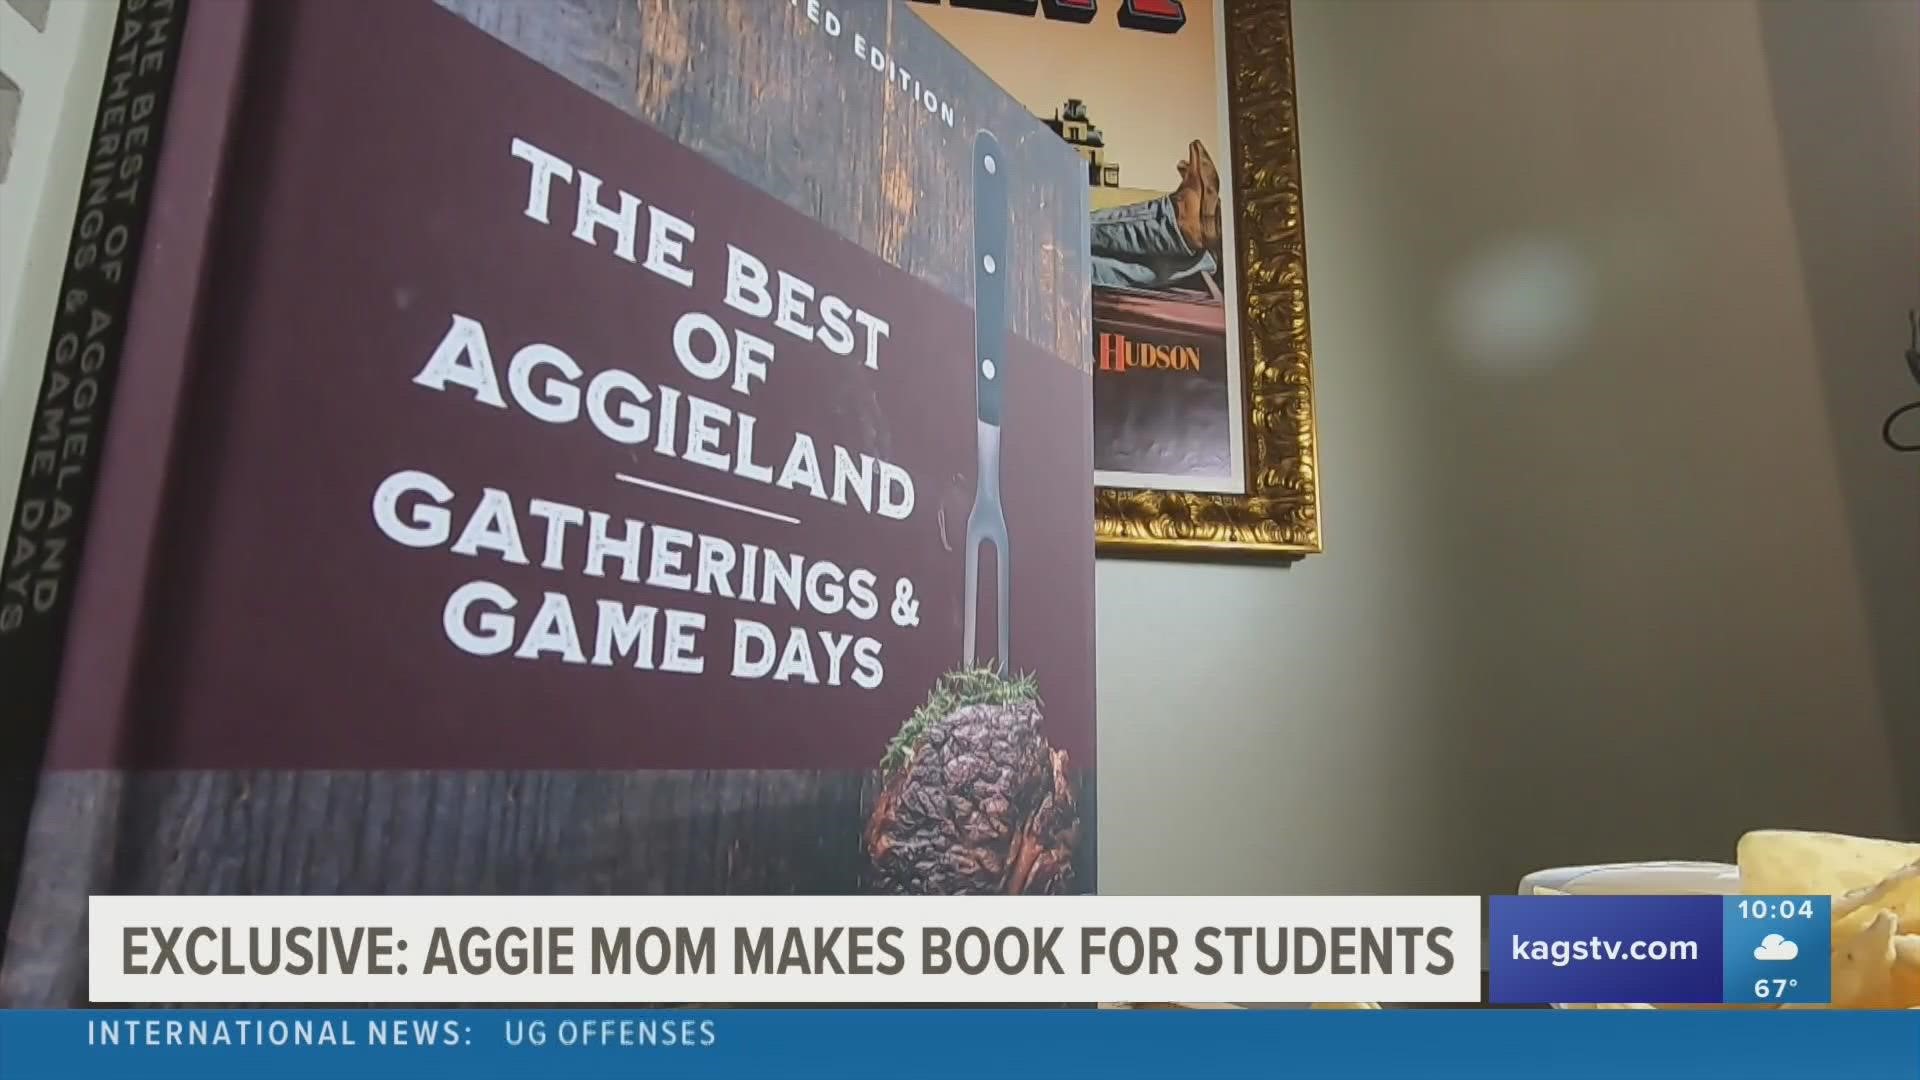 Tamar Elkeles, author of The Best of Aggieland Cookbook in 2021, raised more than $60,000 in scholarships for Aggie students that year.